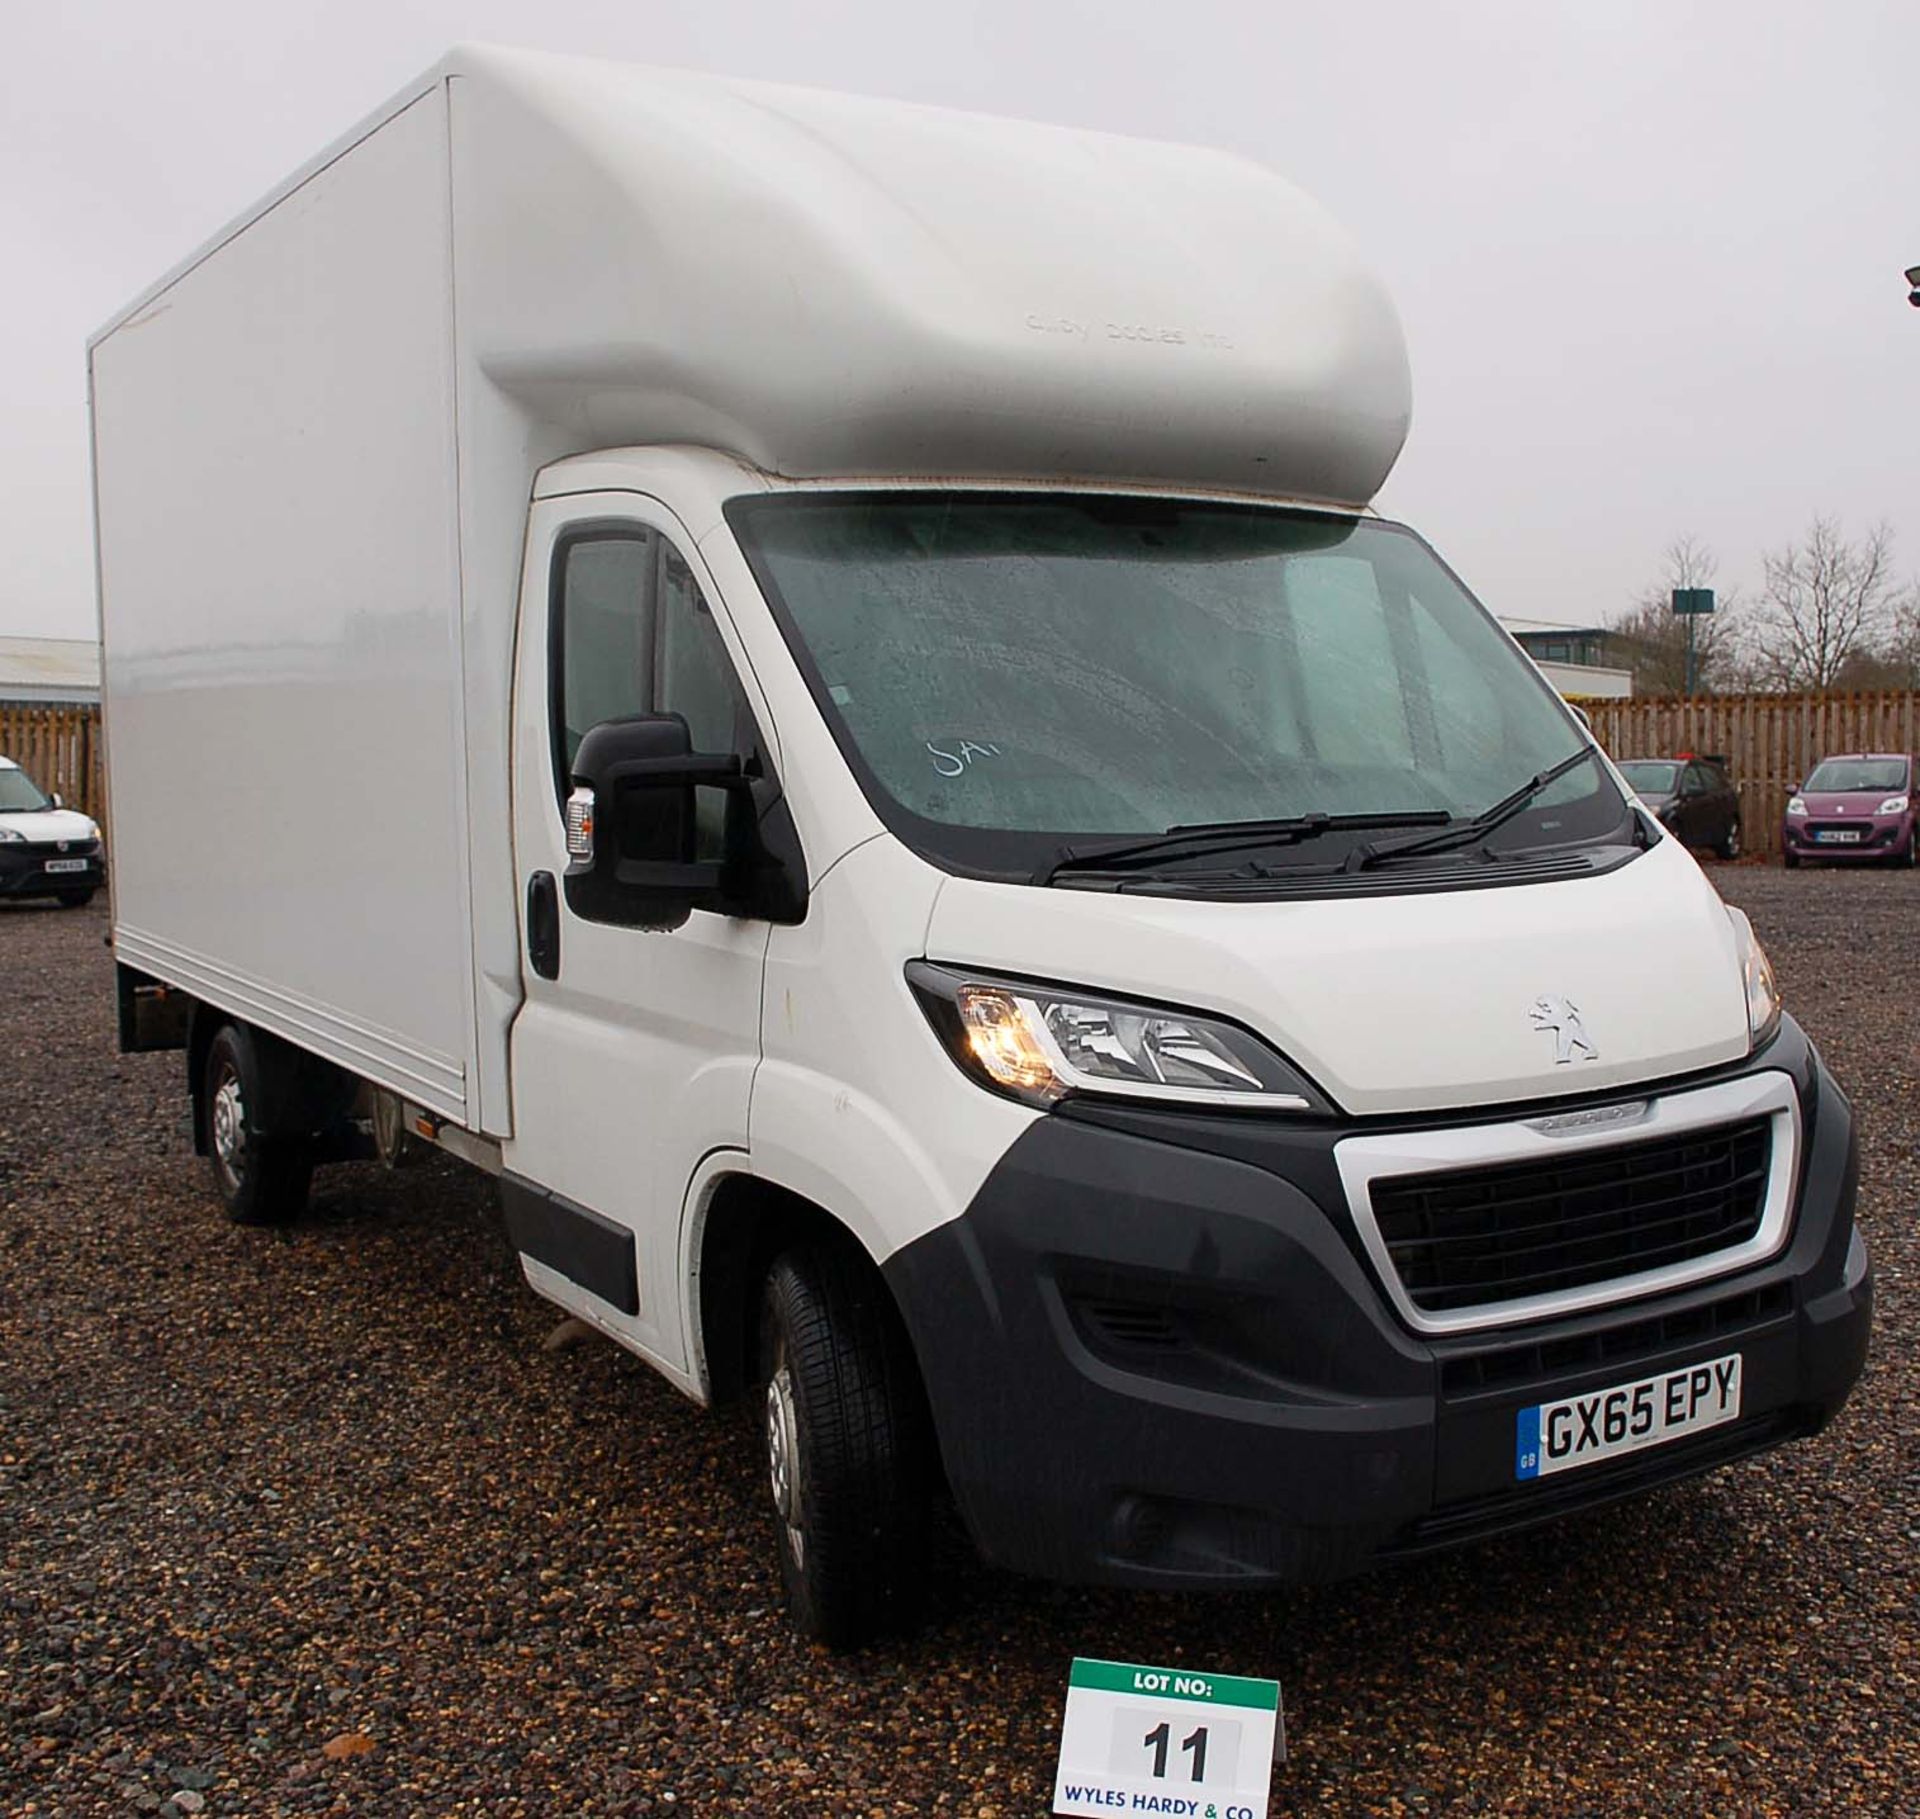 A PEUGEOT BOXER 335L3 2.2 HDi Luton Van Registration Number: GX65 EPY. 6-Speed Manual Gearbox,